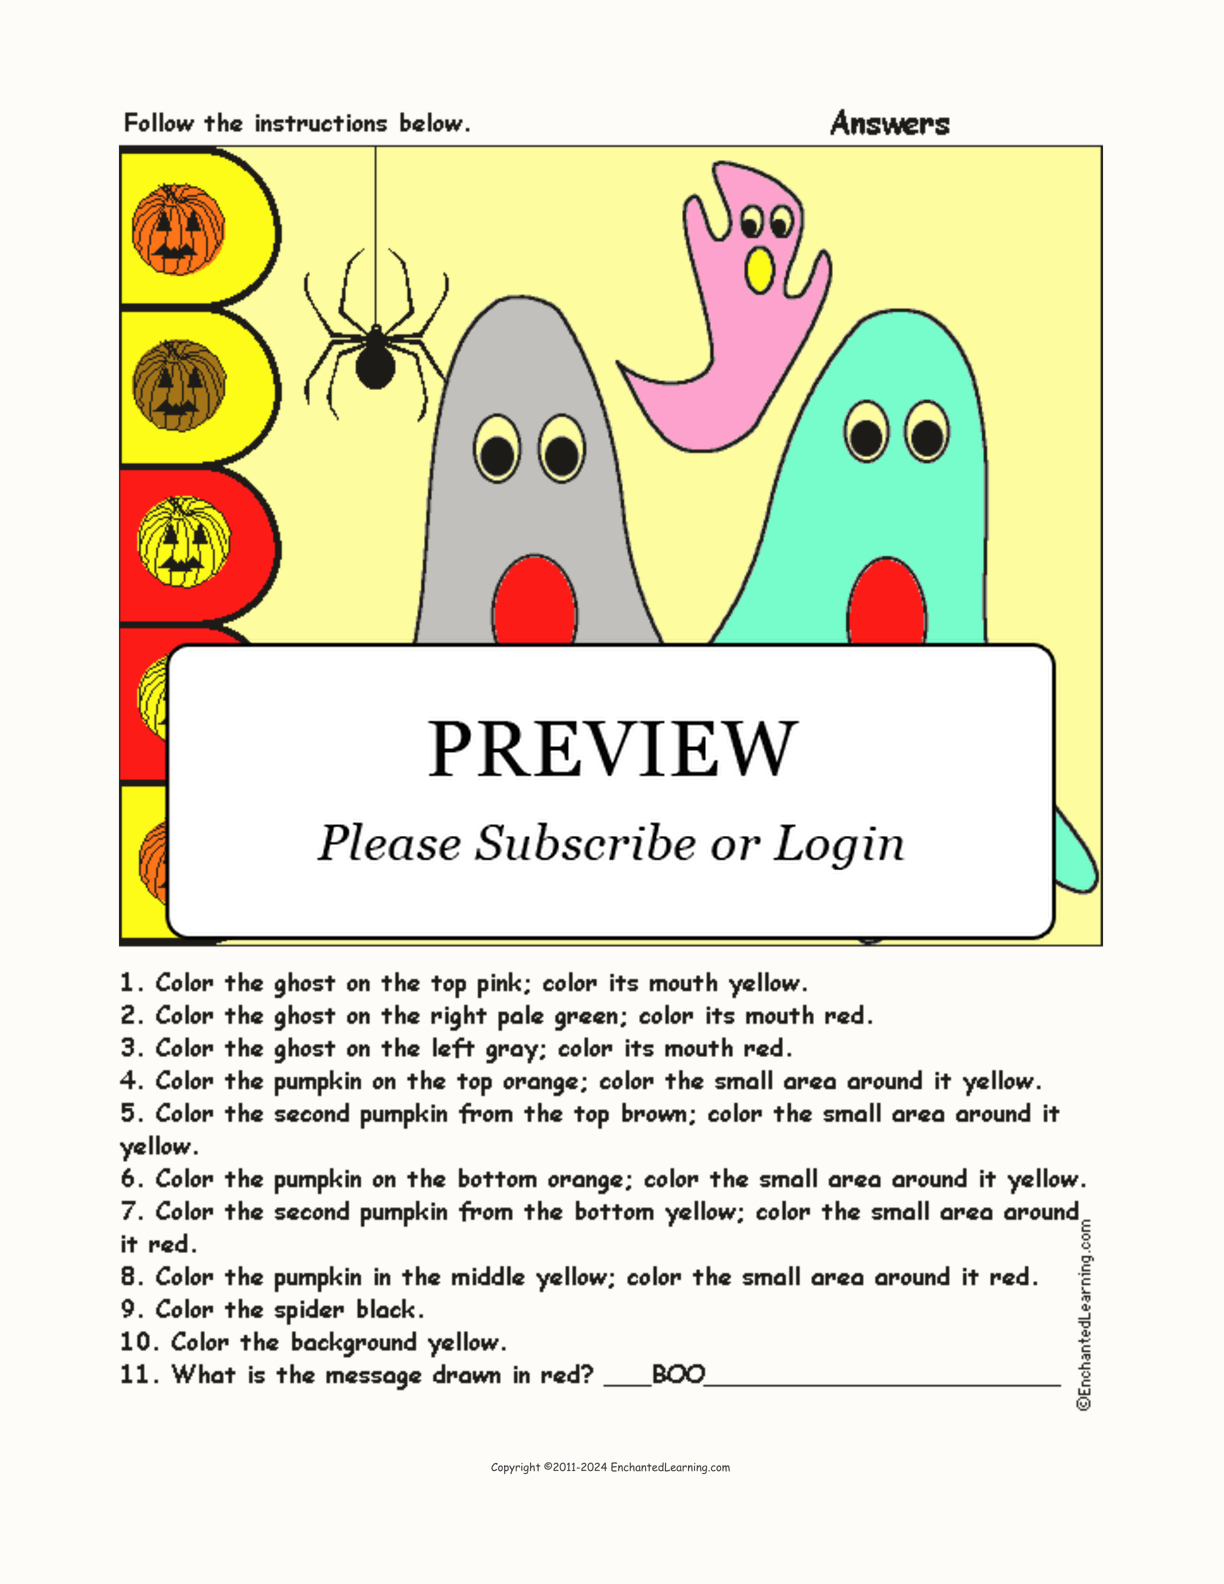 Ghastly Ghosts: Follow the Instructions interactive worksheet page 2